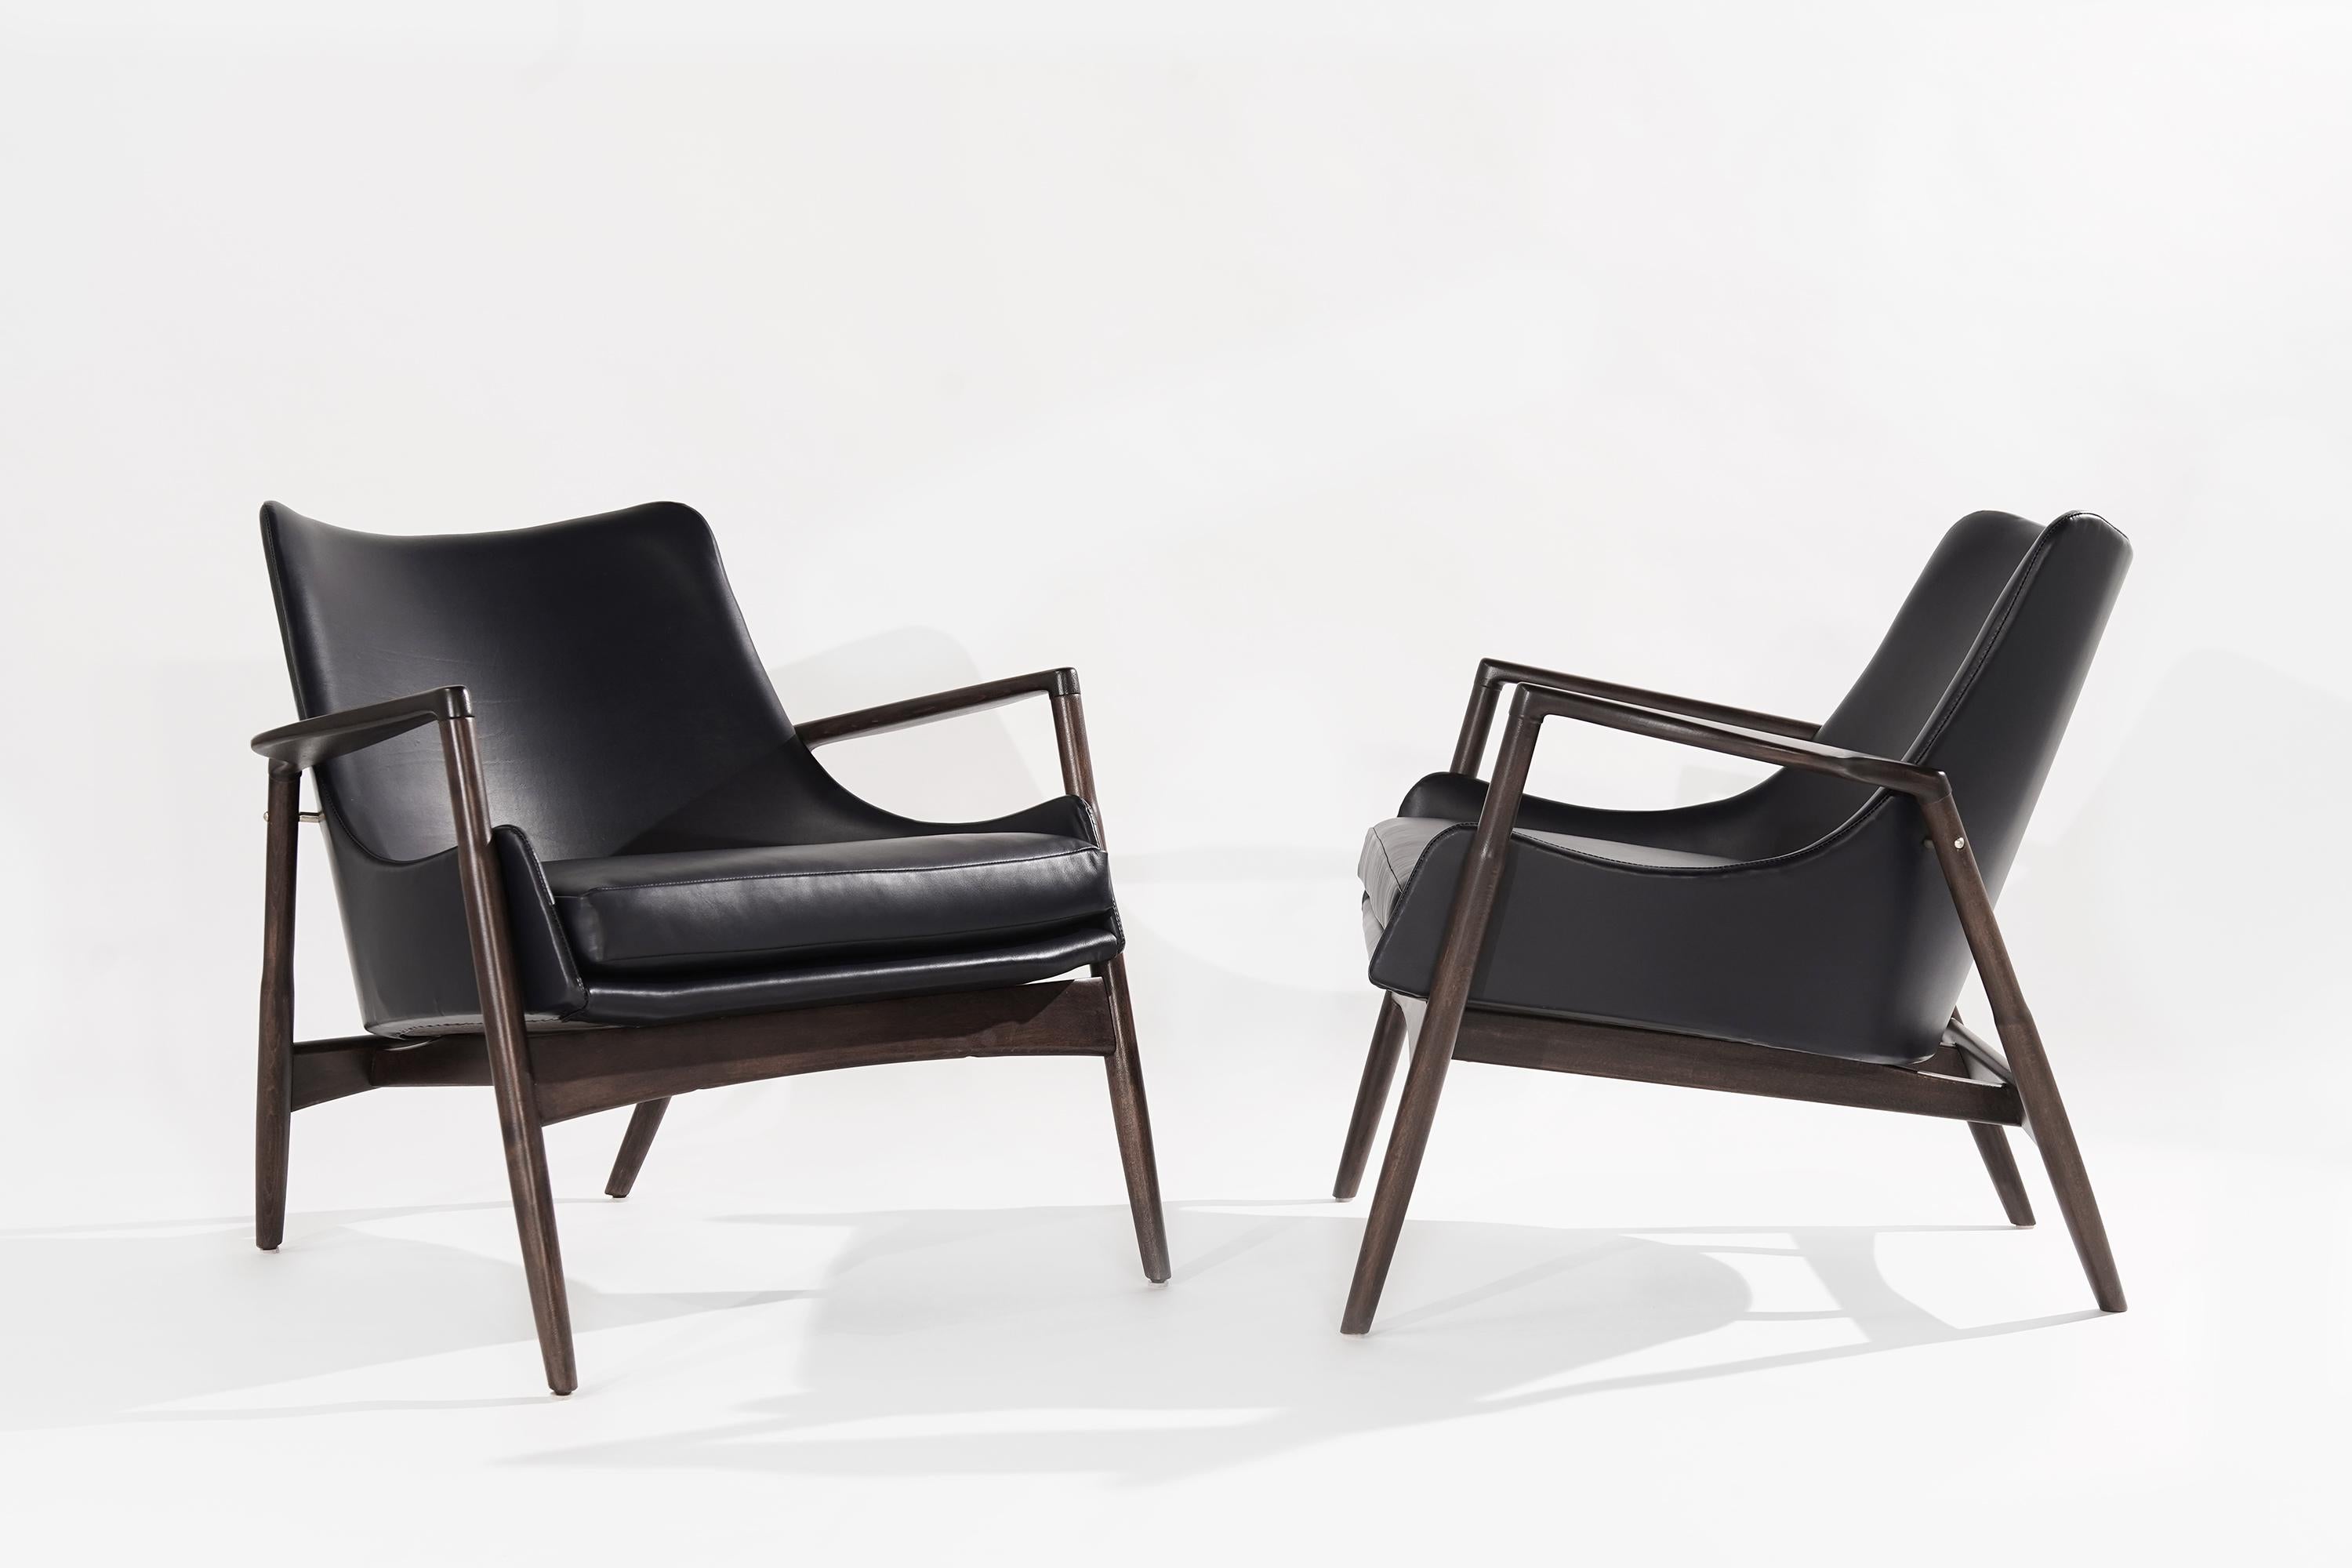 Set of two midcentury Scandinavian Easy Lounge Chairs by Ib Kofod Larsen for Selig. Classic organic design, featuring fully restored sculptural teak framework with brass details, newly upholstered in midnight blue leather by Holly Hunt.

Other